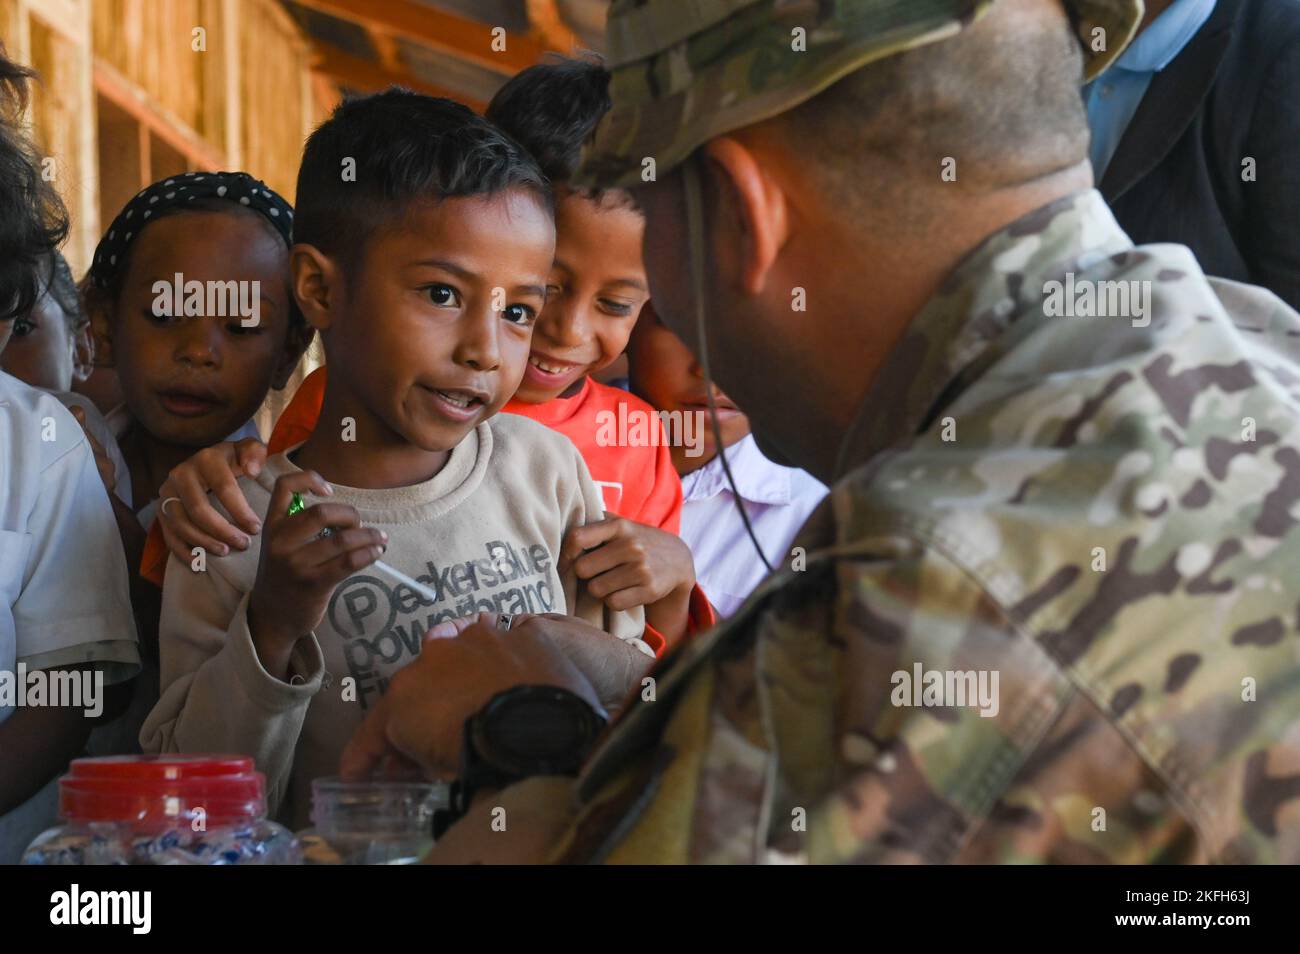 U.S. Air Force Master Sgt. Jayson Wells, lead logistician, passes out candy to children in Baucau, Timor-Leste, during a school supply donation purchased by the participants of Pacific Angel 22-4 on Sept. 16, 2022. The operation, scheduled Sept. 12-17, focuses on capacity building through health services outreach, engineering civic action program construction projects and subject matter expert exchanges. Stock Photo